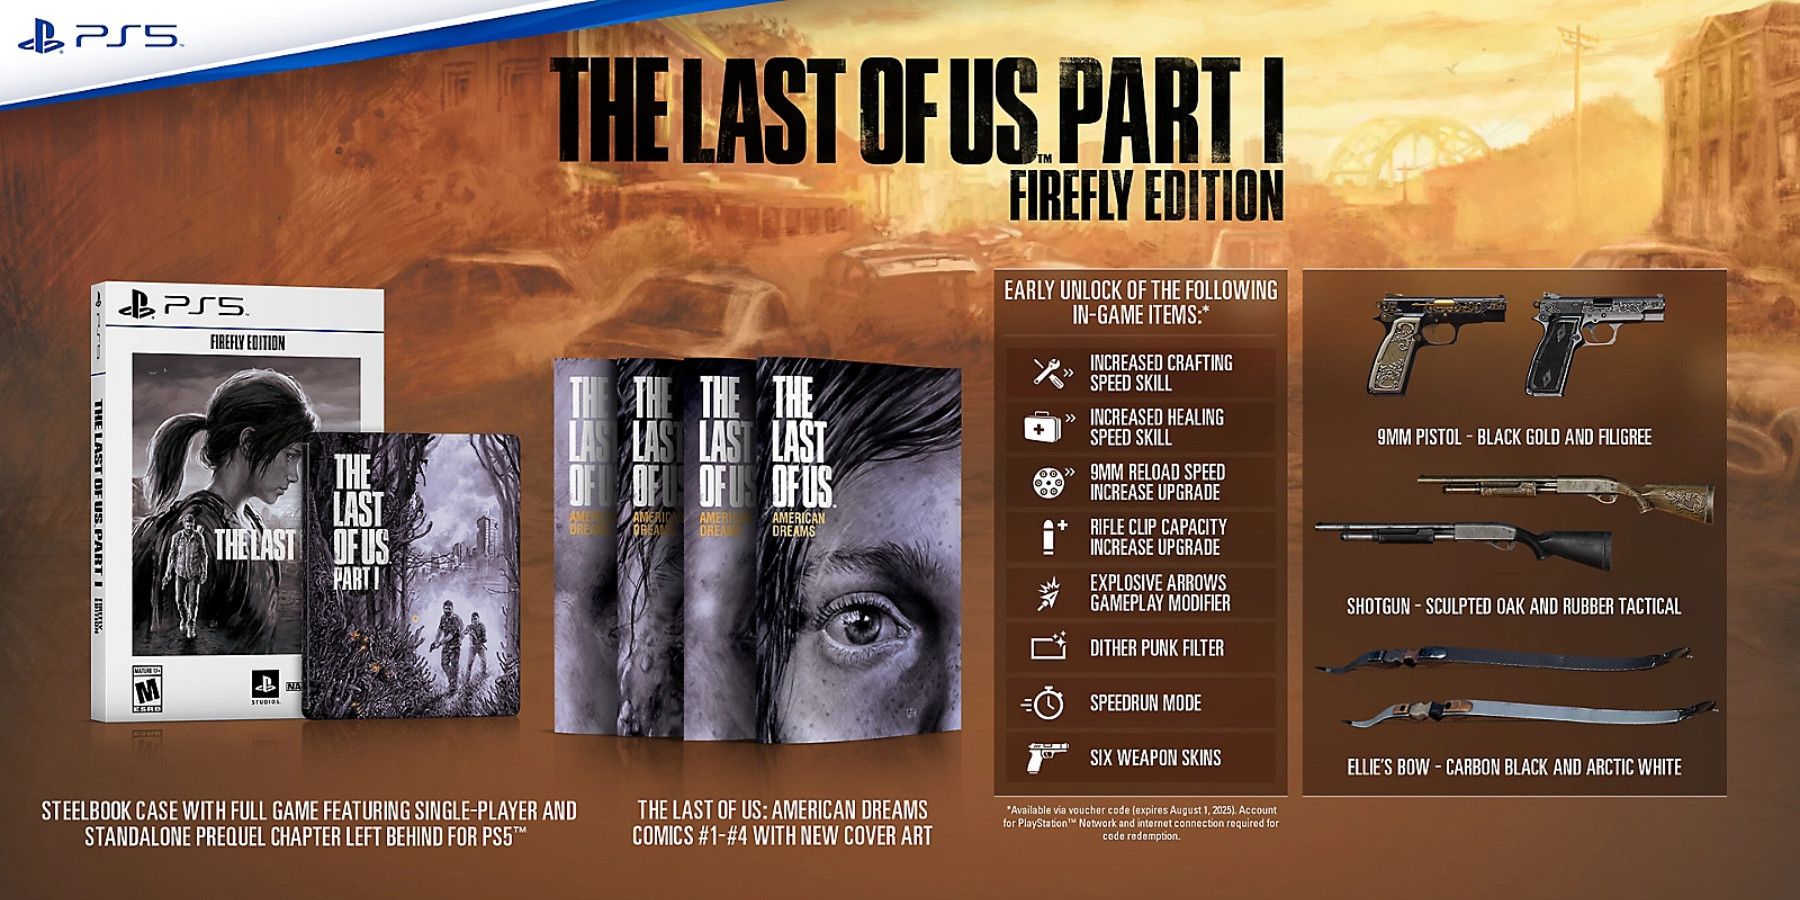 Last of Us Part 1 Firefly Edition